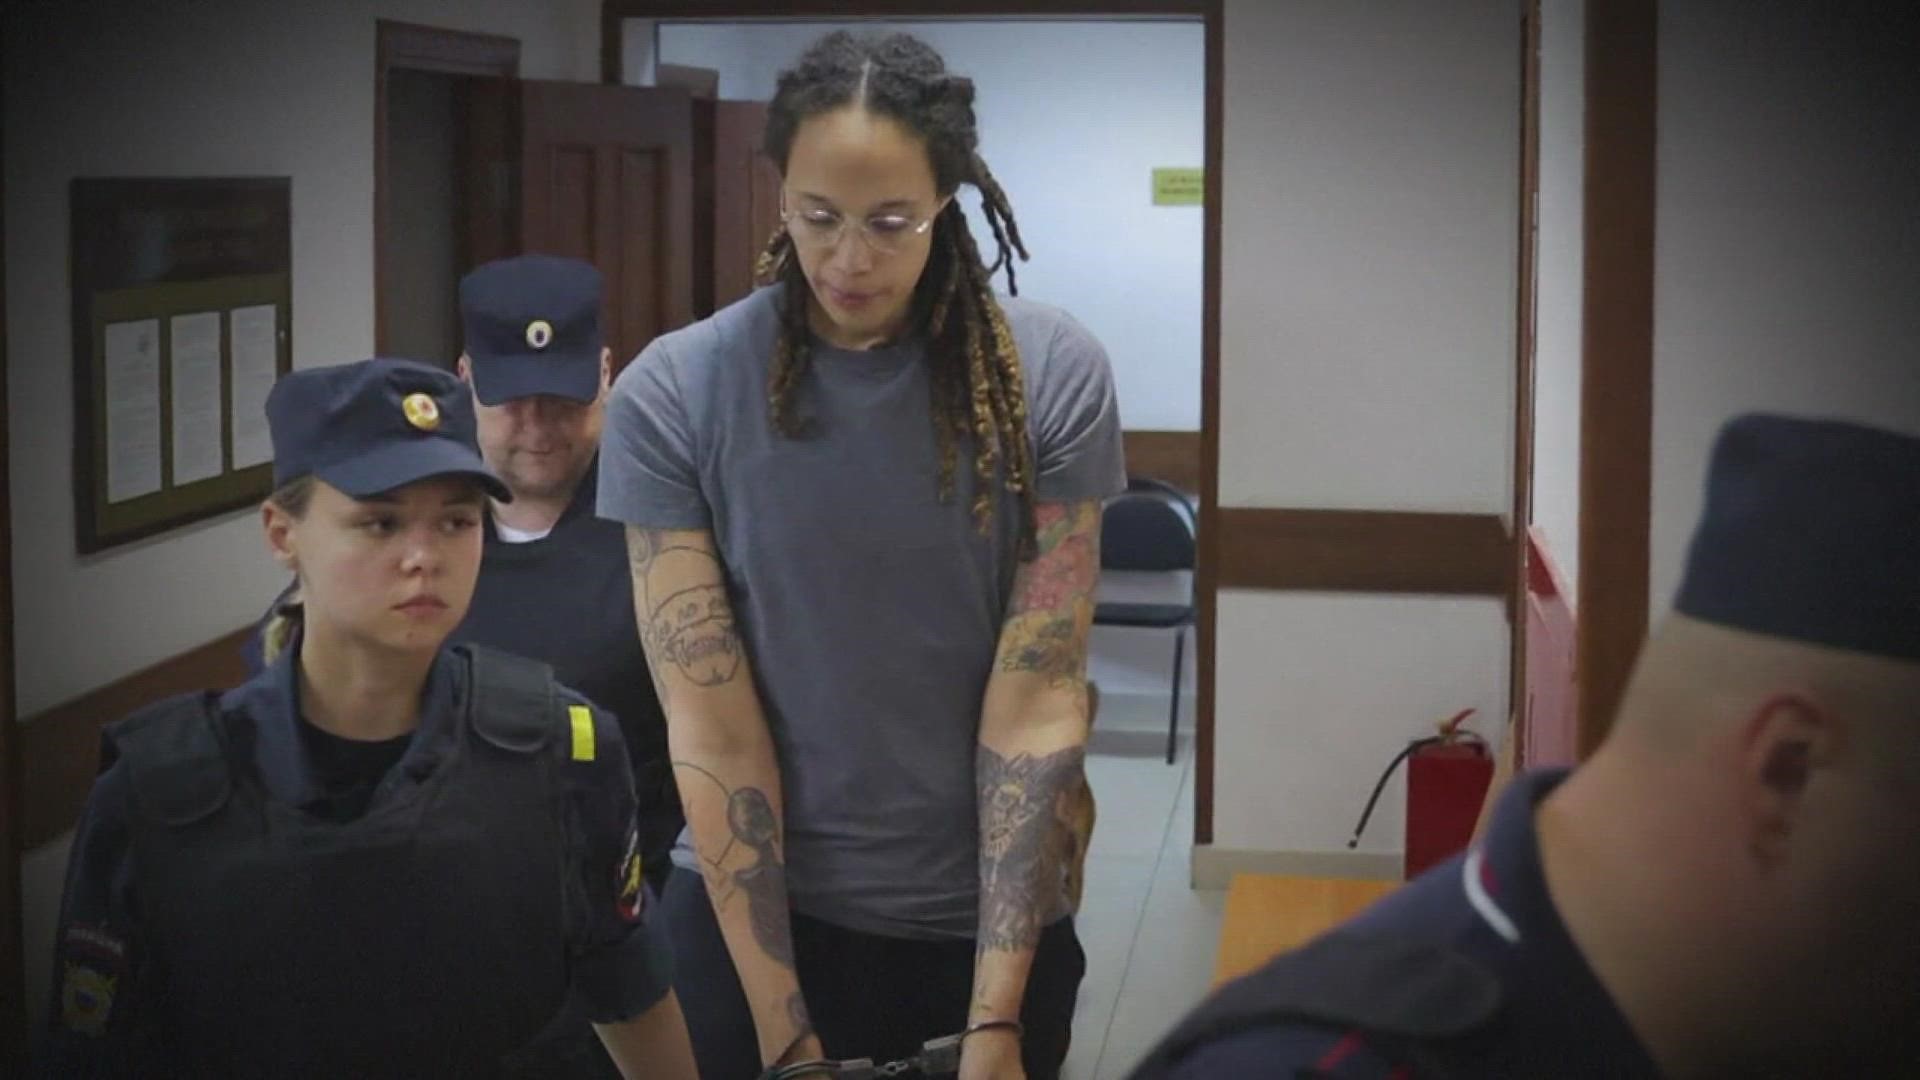 Brittney Griner showed little emotion to the sentence in the Russian courtroom but her lawyers said later she was “very upset, very stressed.”